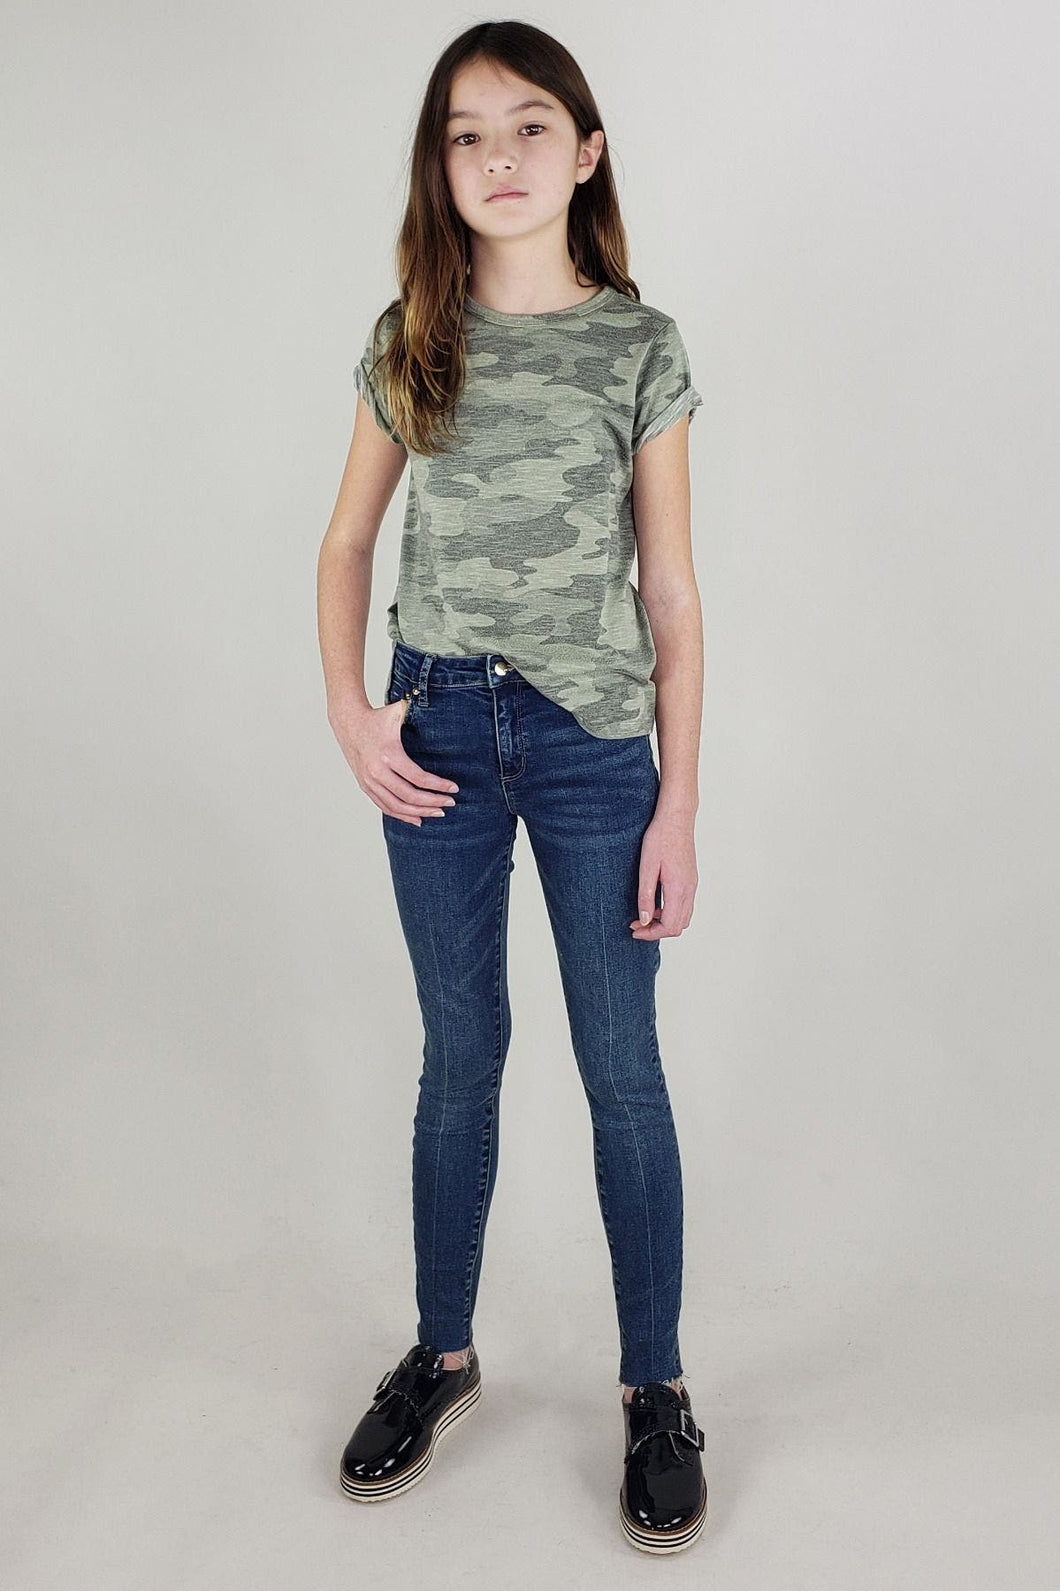 HIGH RISE FRAY SKINNY JEANS